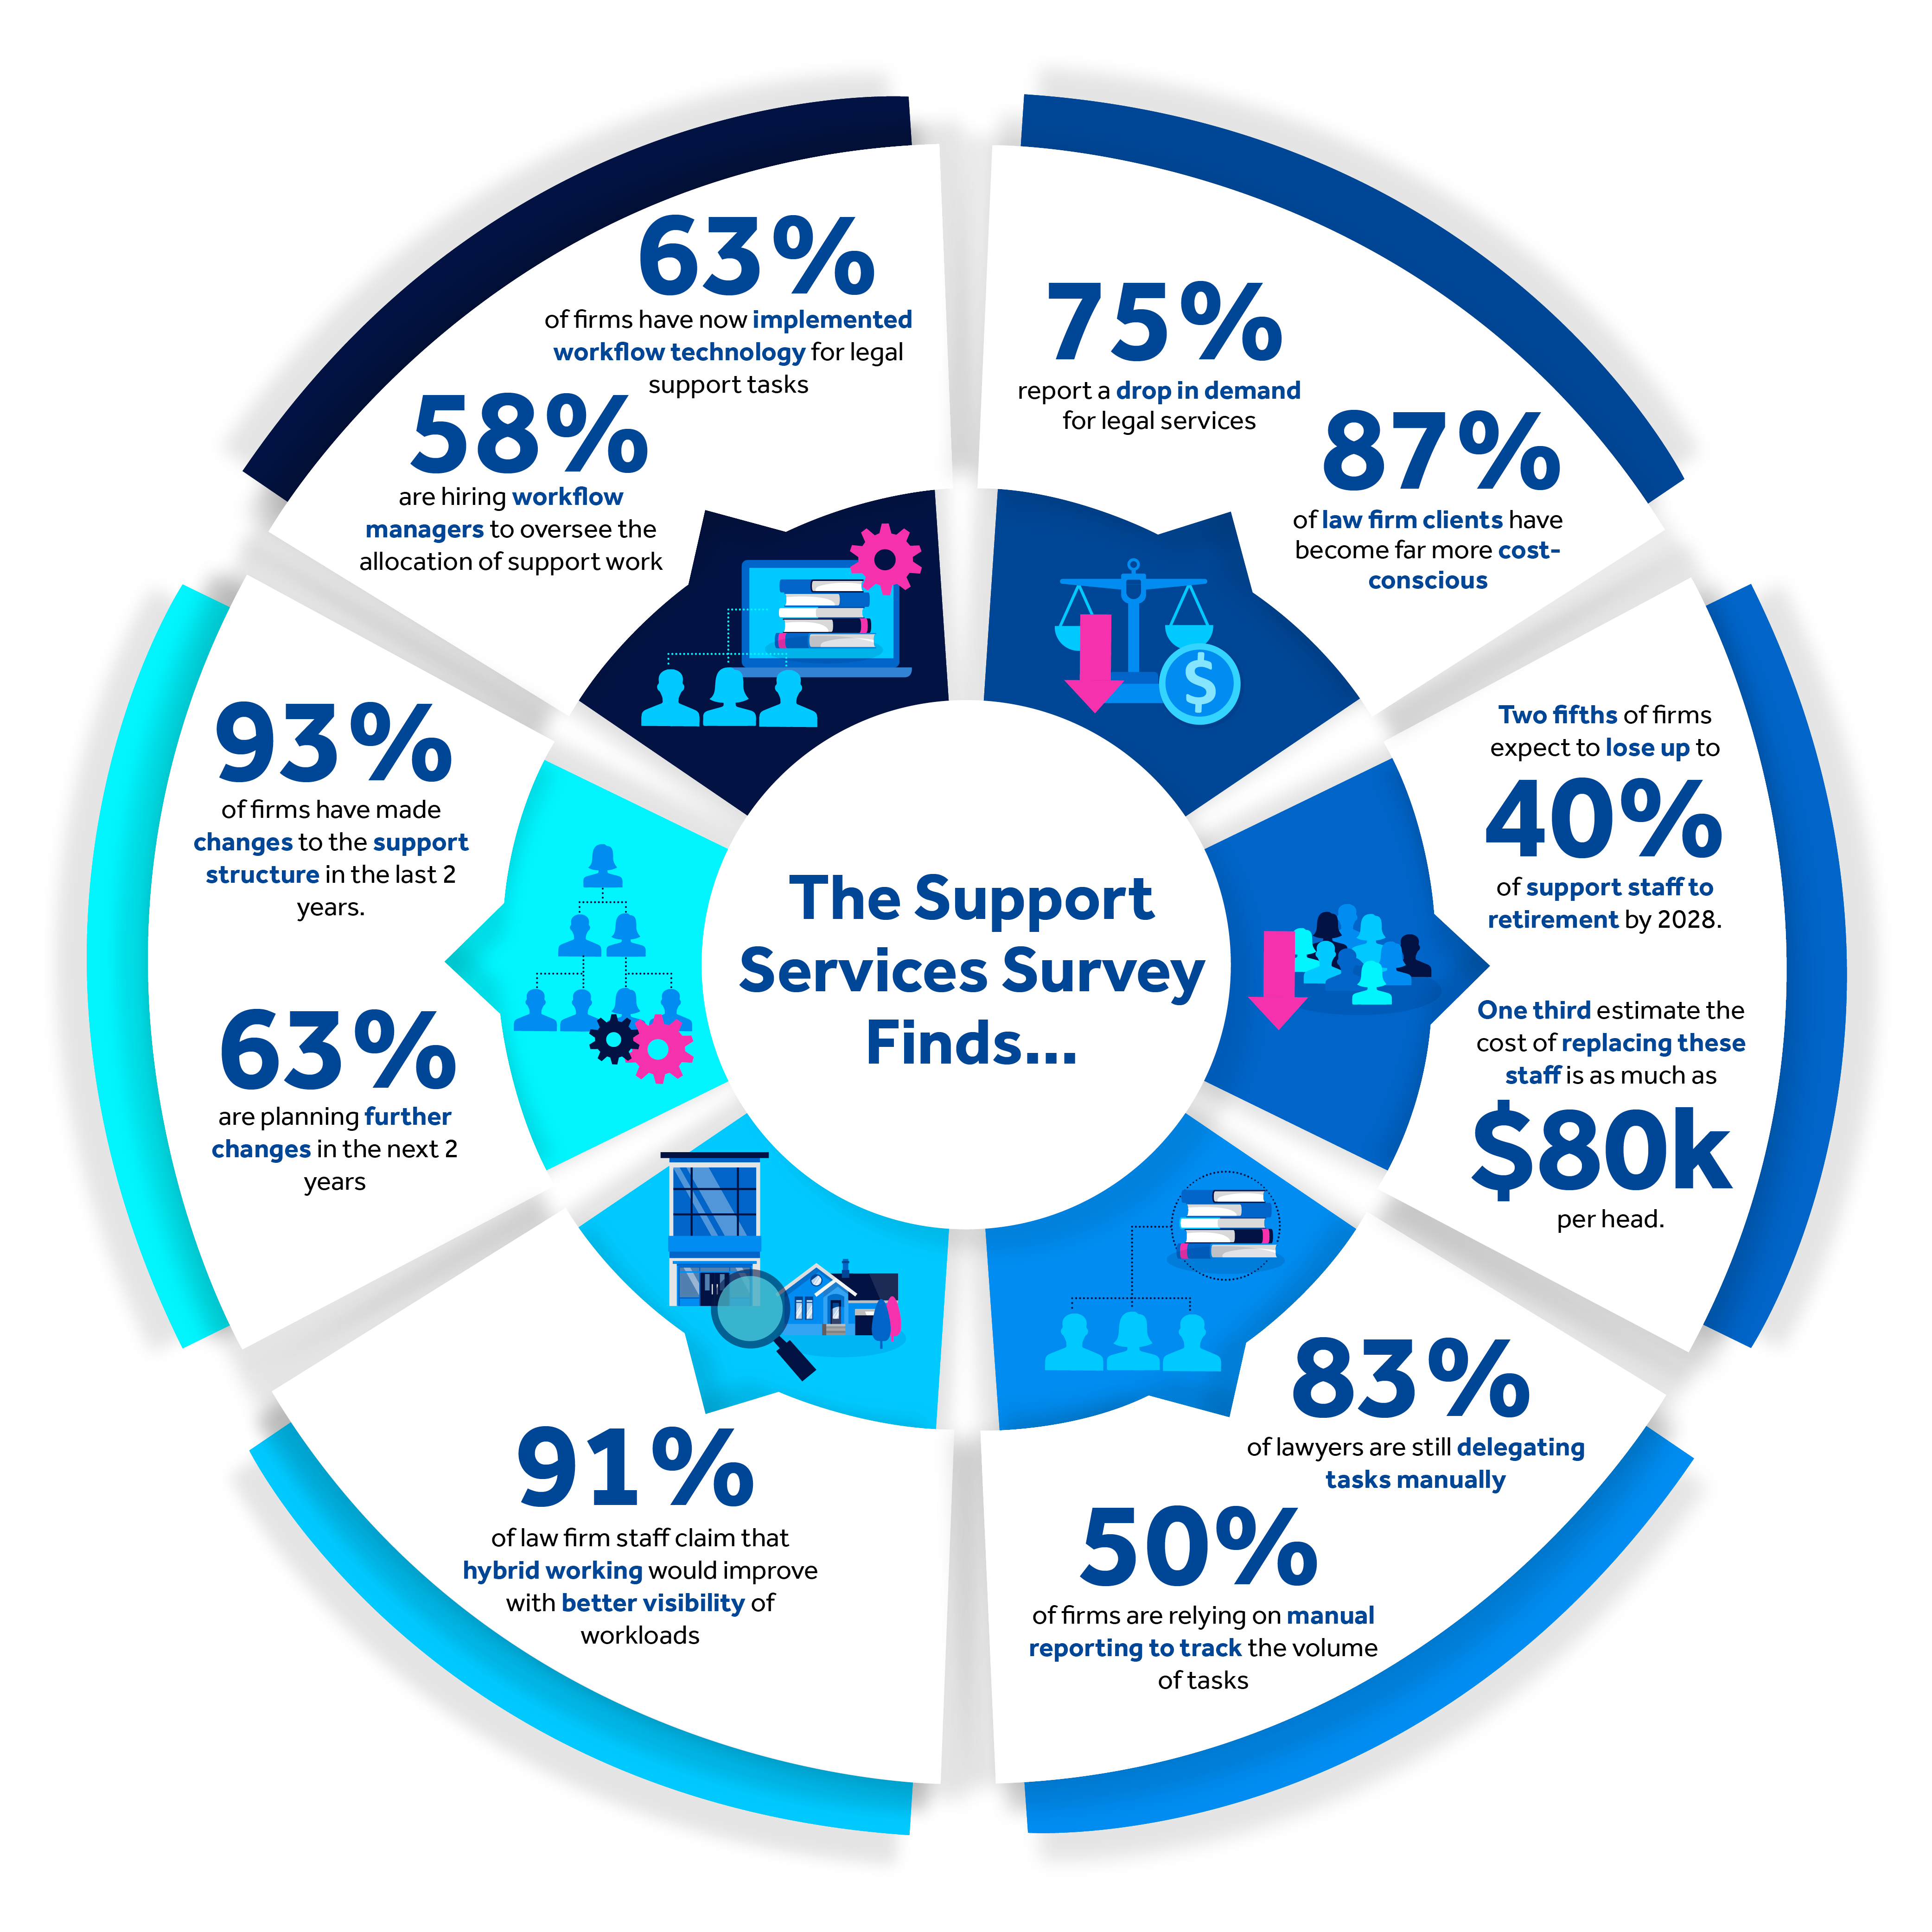 The Support Services Survey Finds....